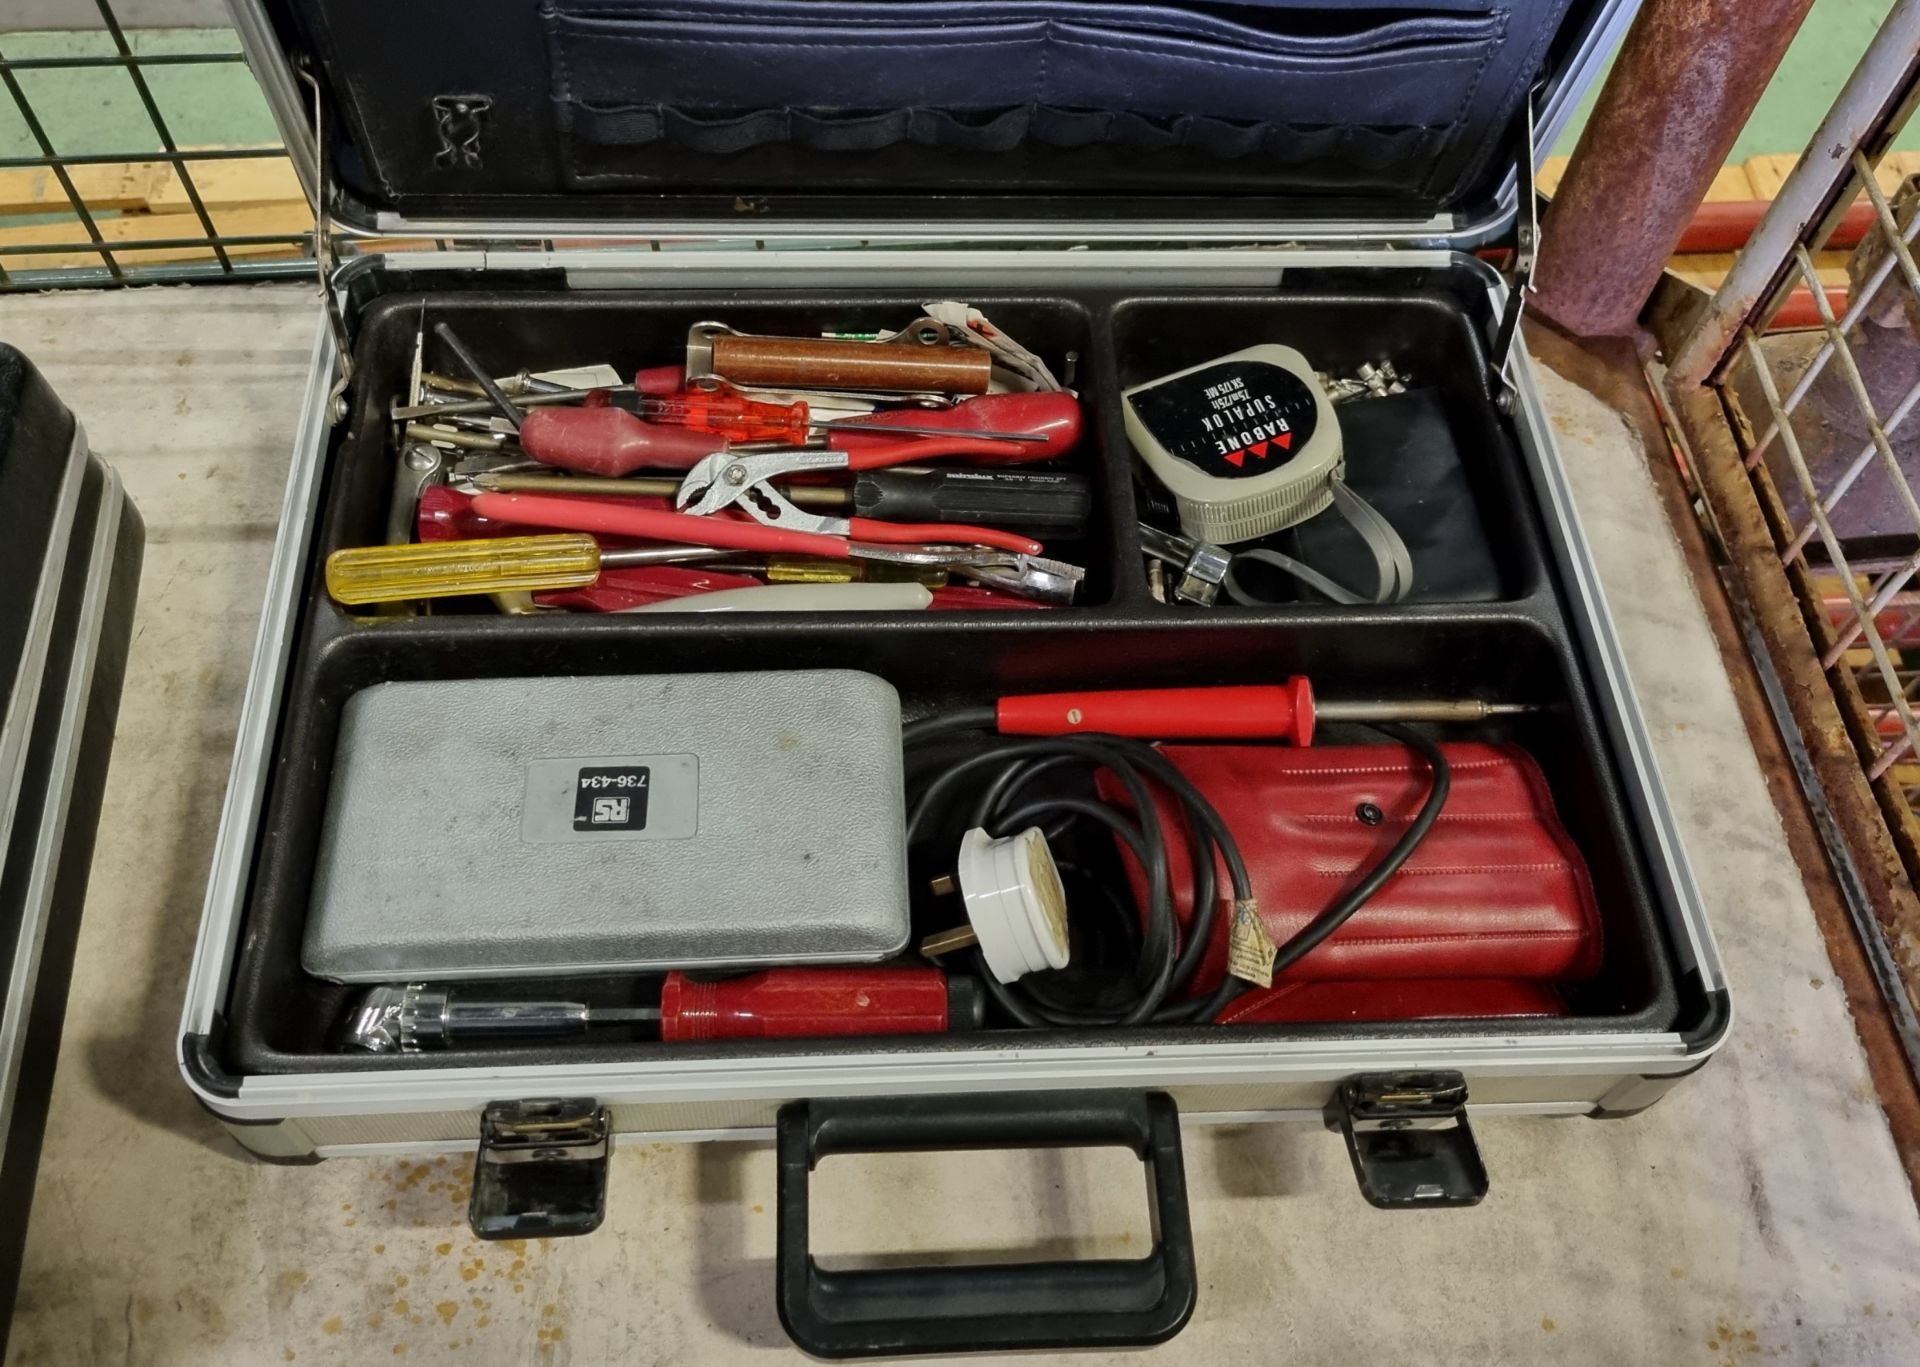 Electricians tools - cases, screwdrivers, soldering iron, pliers, wire strippers, crimping tools - Image 9 of 9